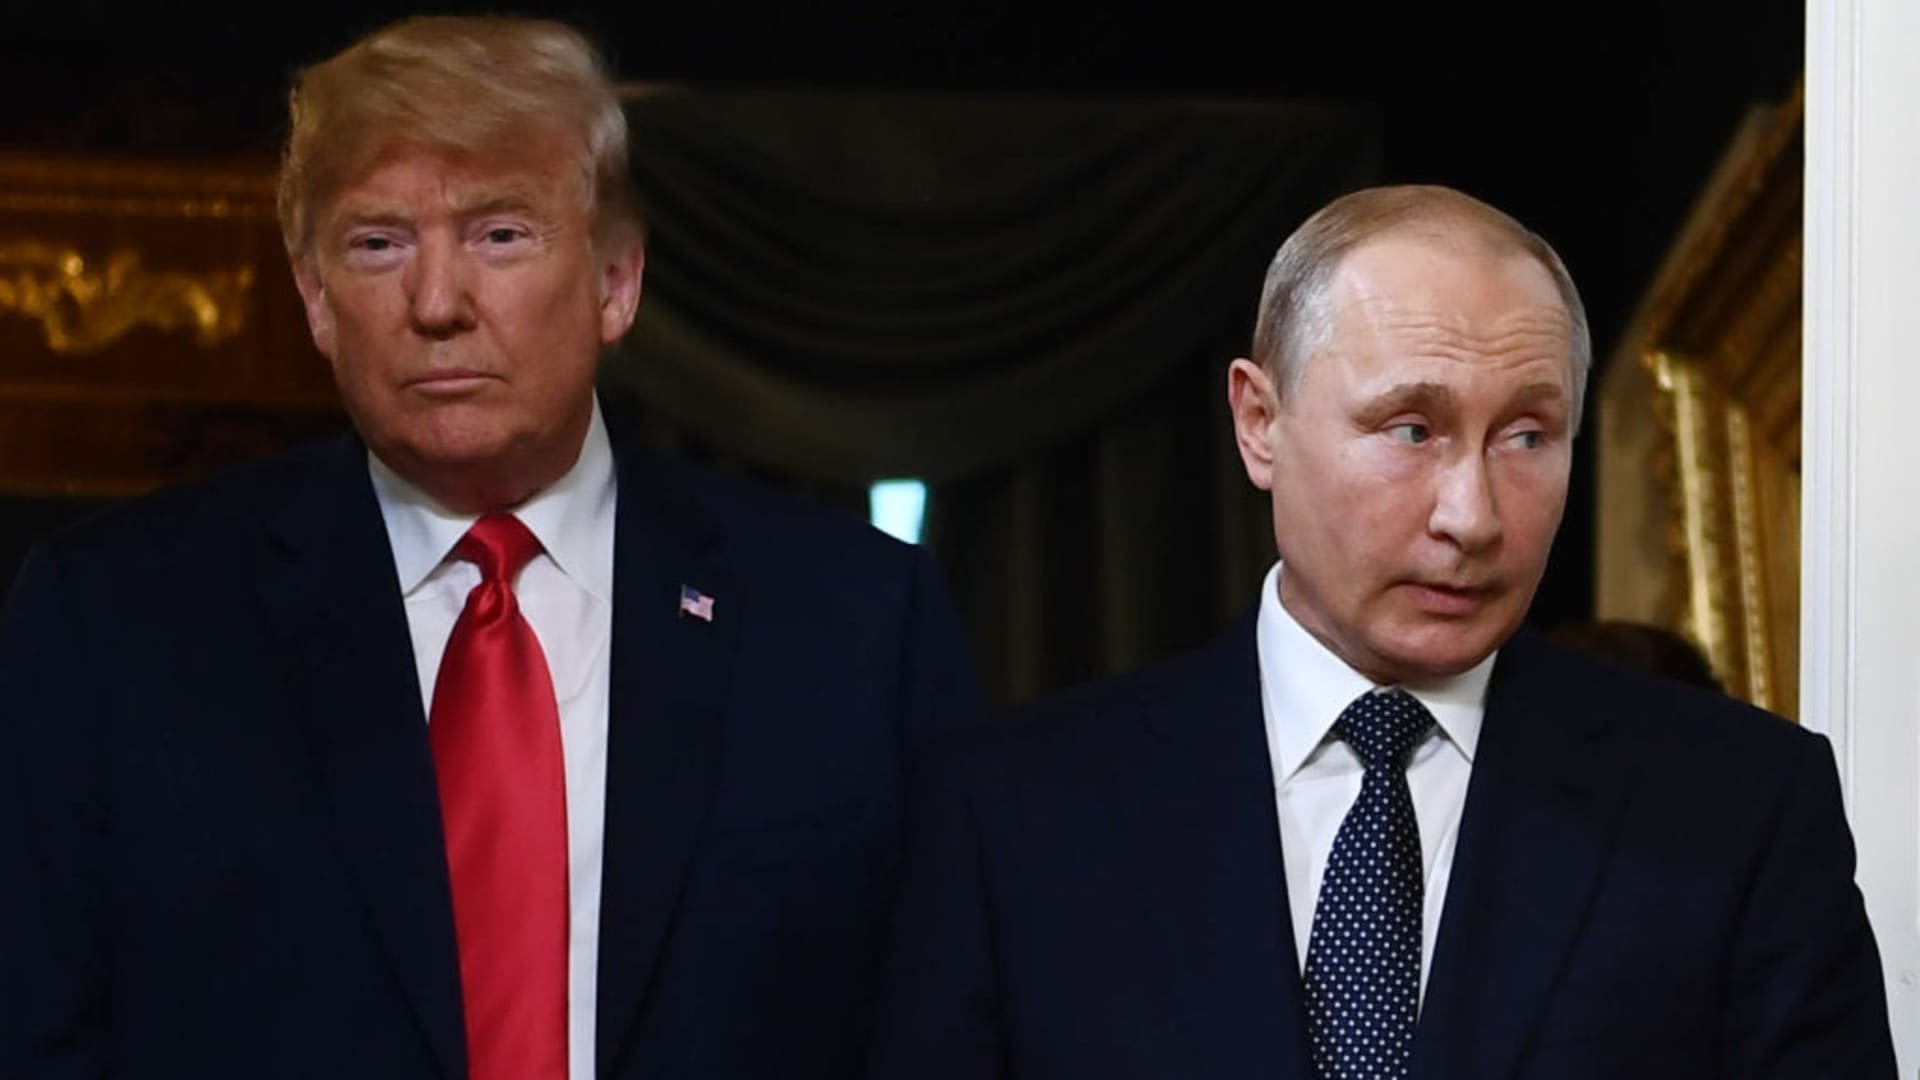 Putin says America is 'burning from the inside' and U.S. courts are being used by Trump's rivals